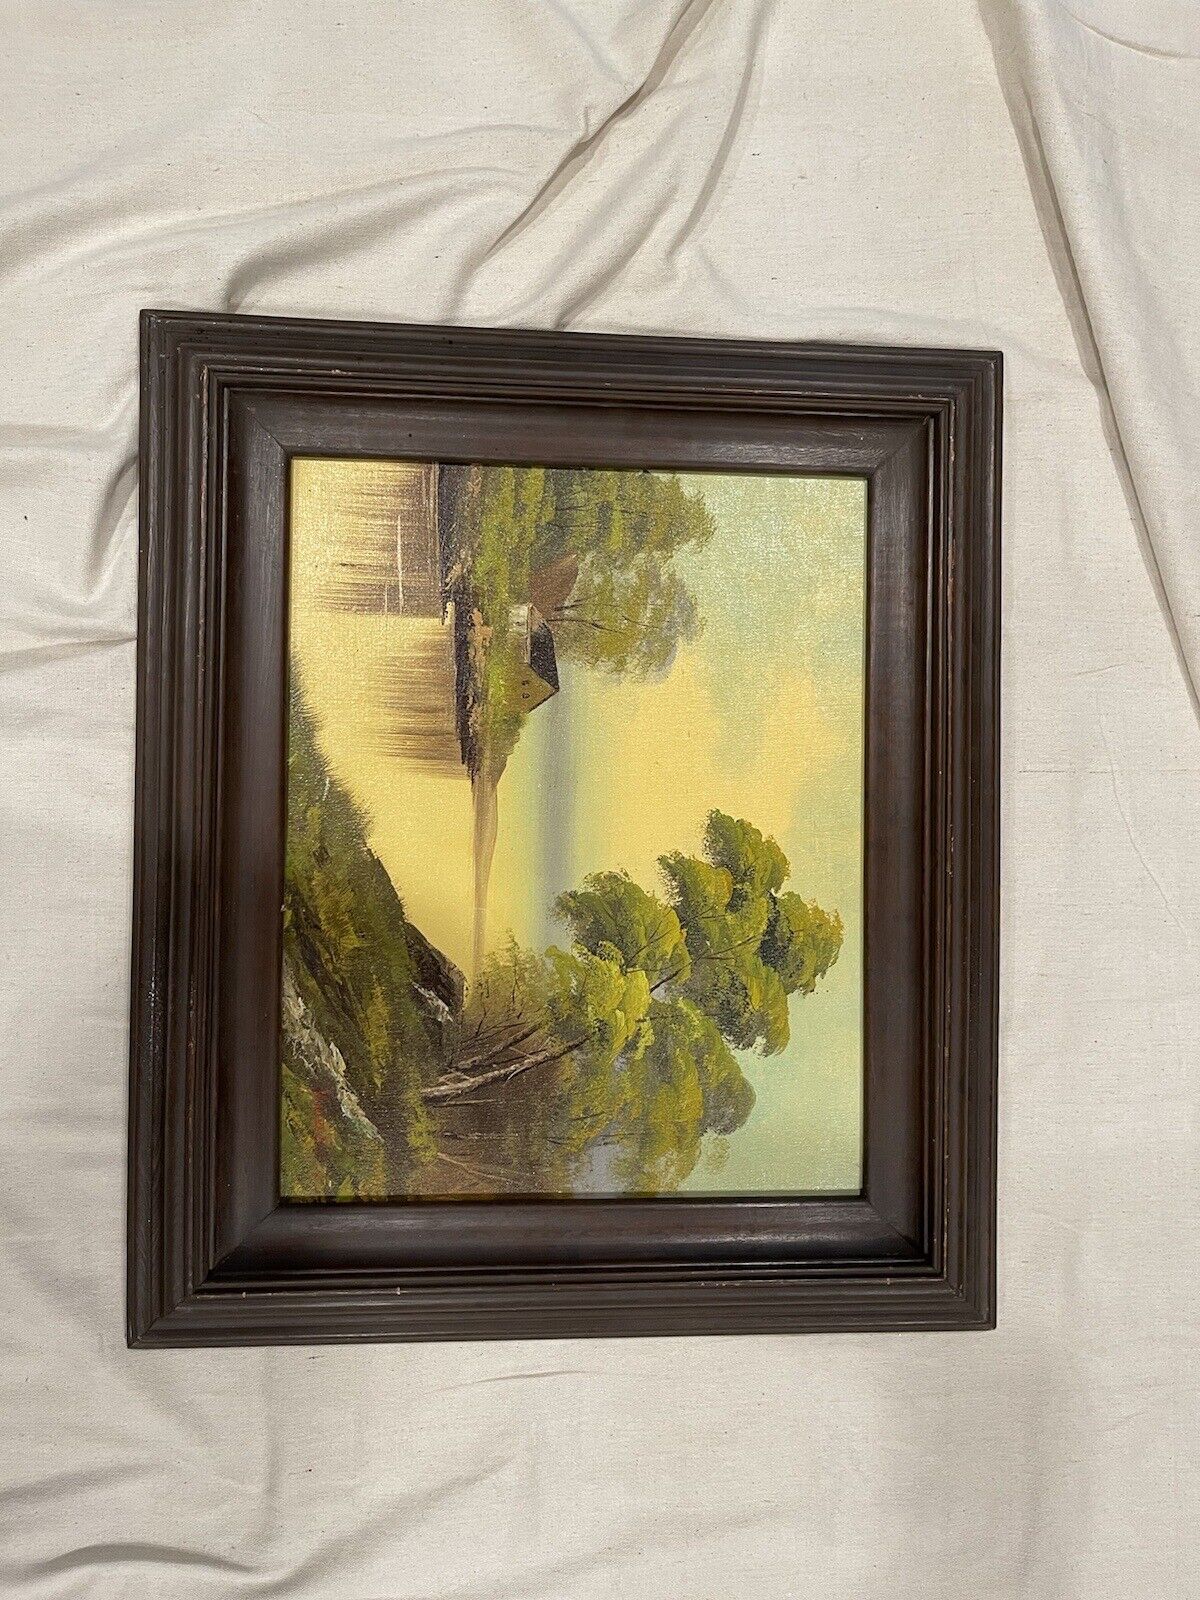 Circa 1900's oil painting in Antique wood frame. 